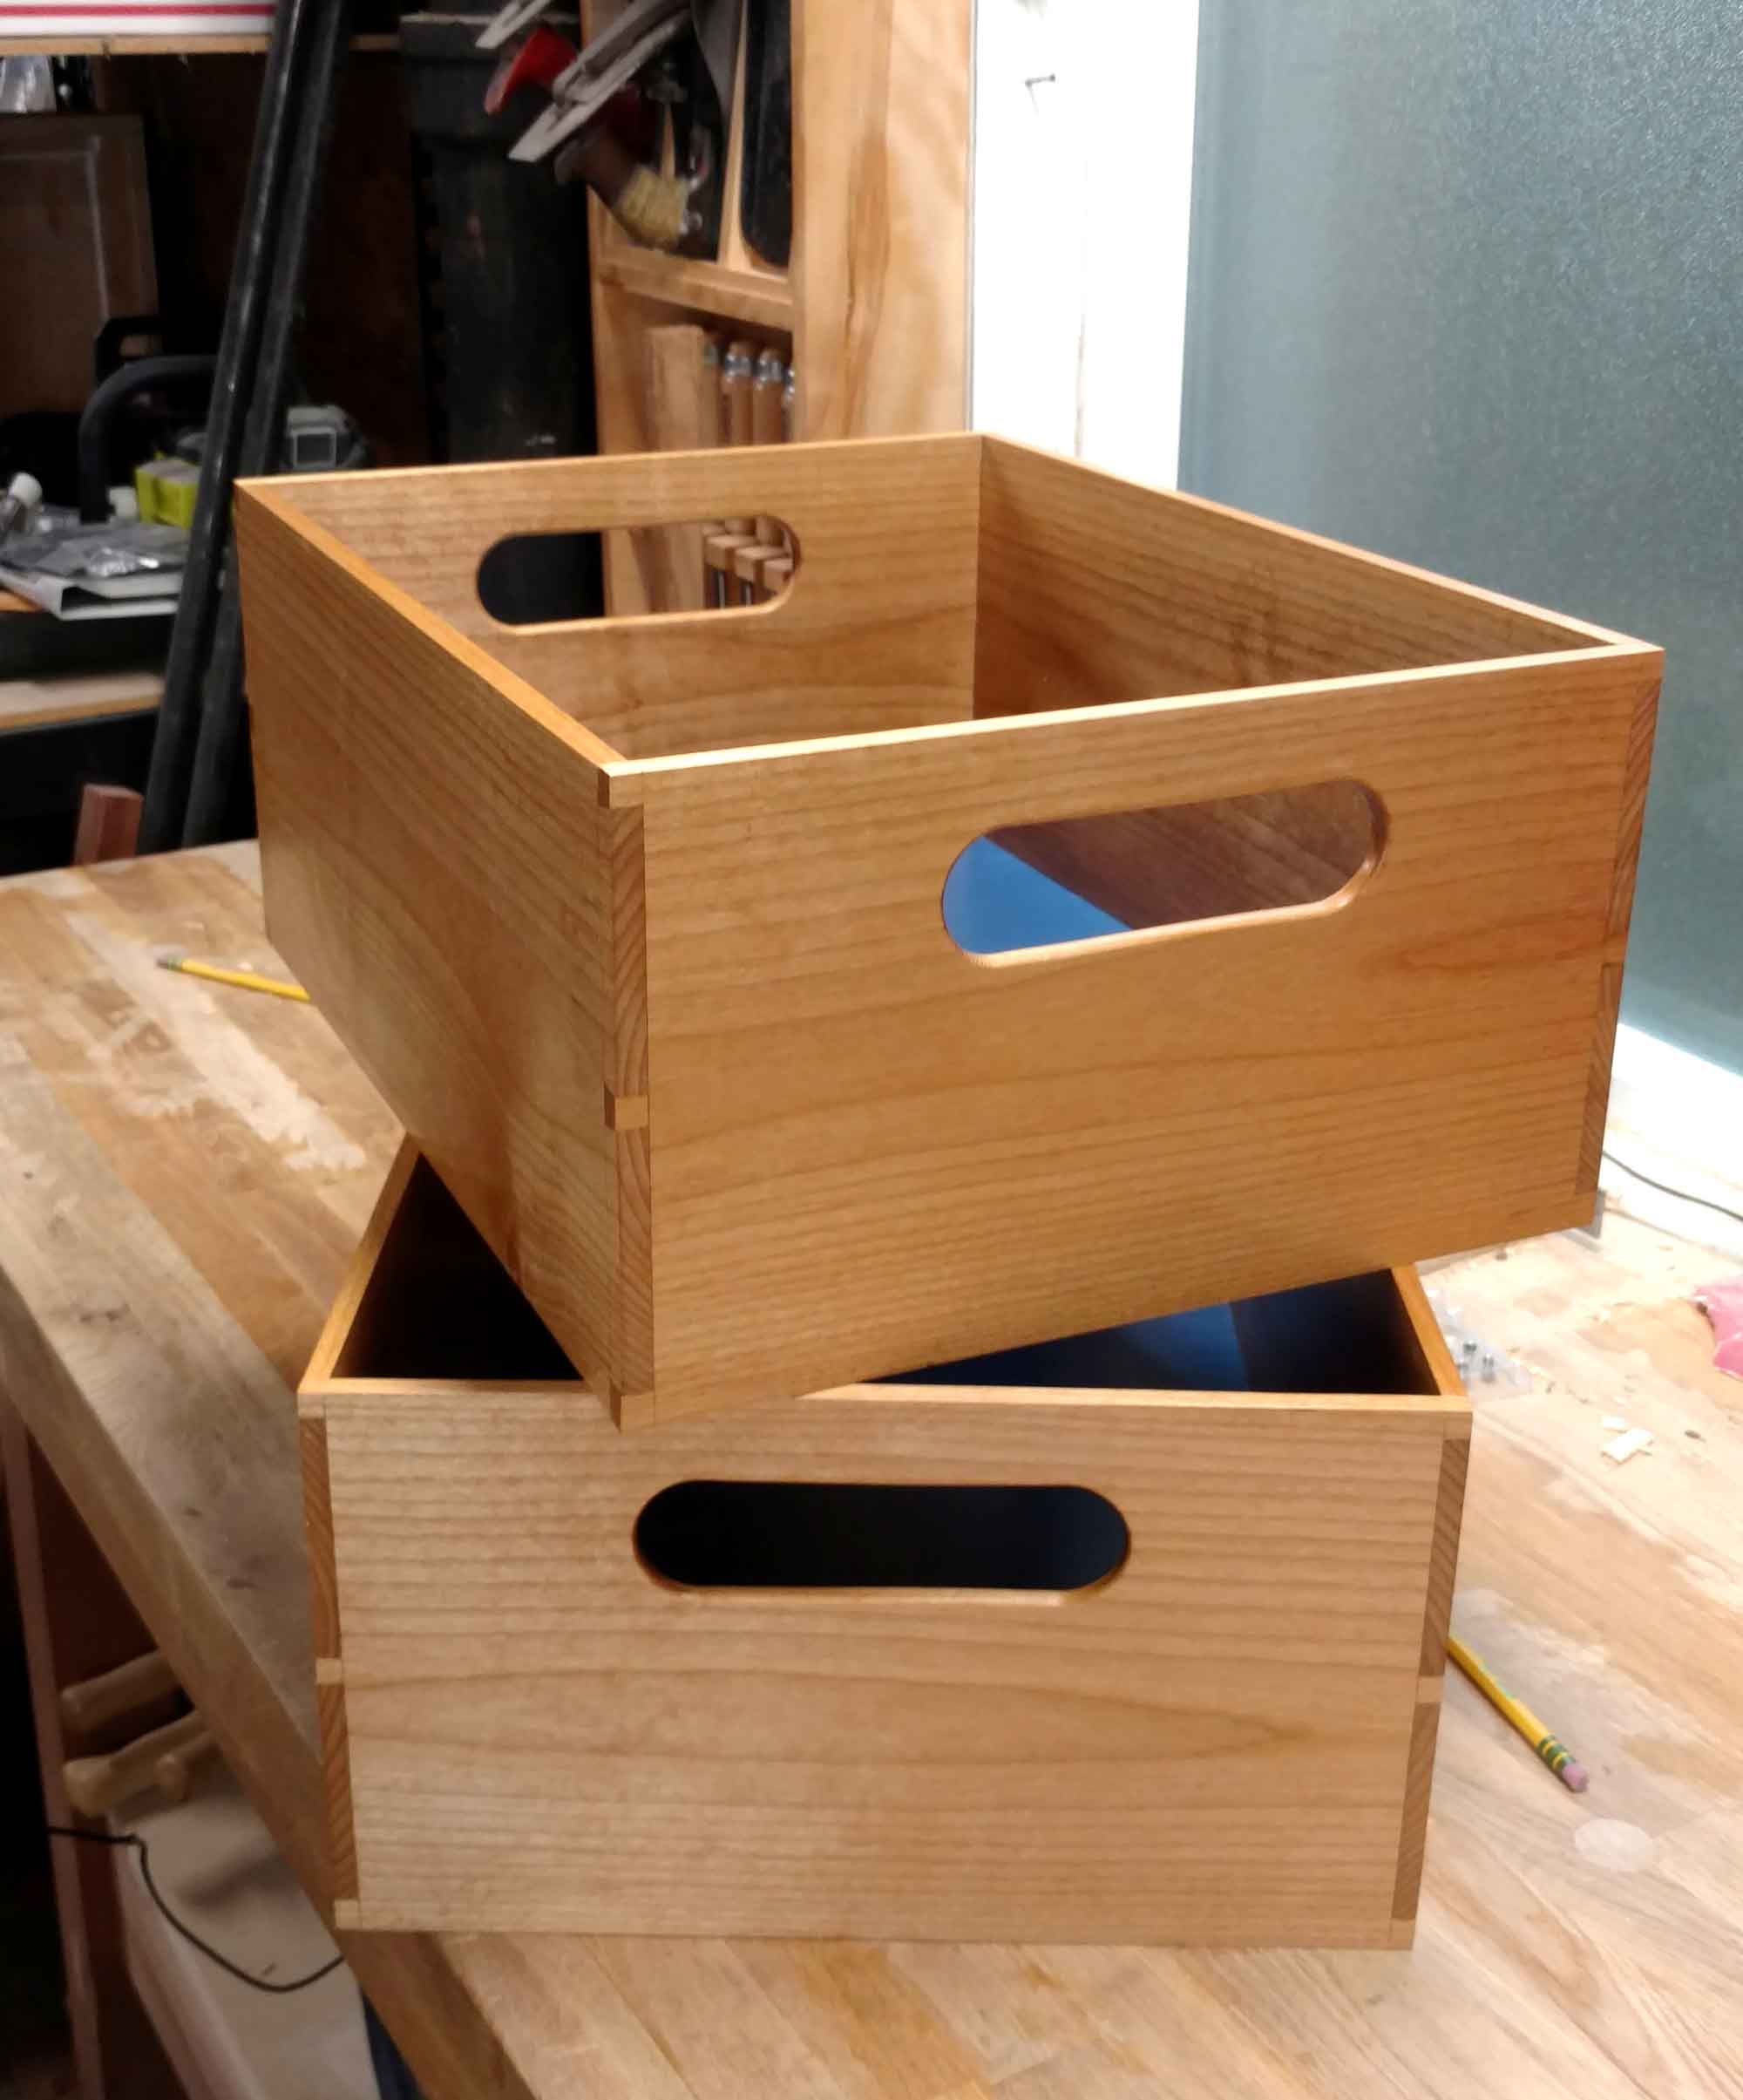 finished boxes stacked